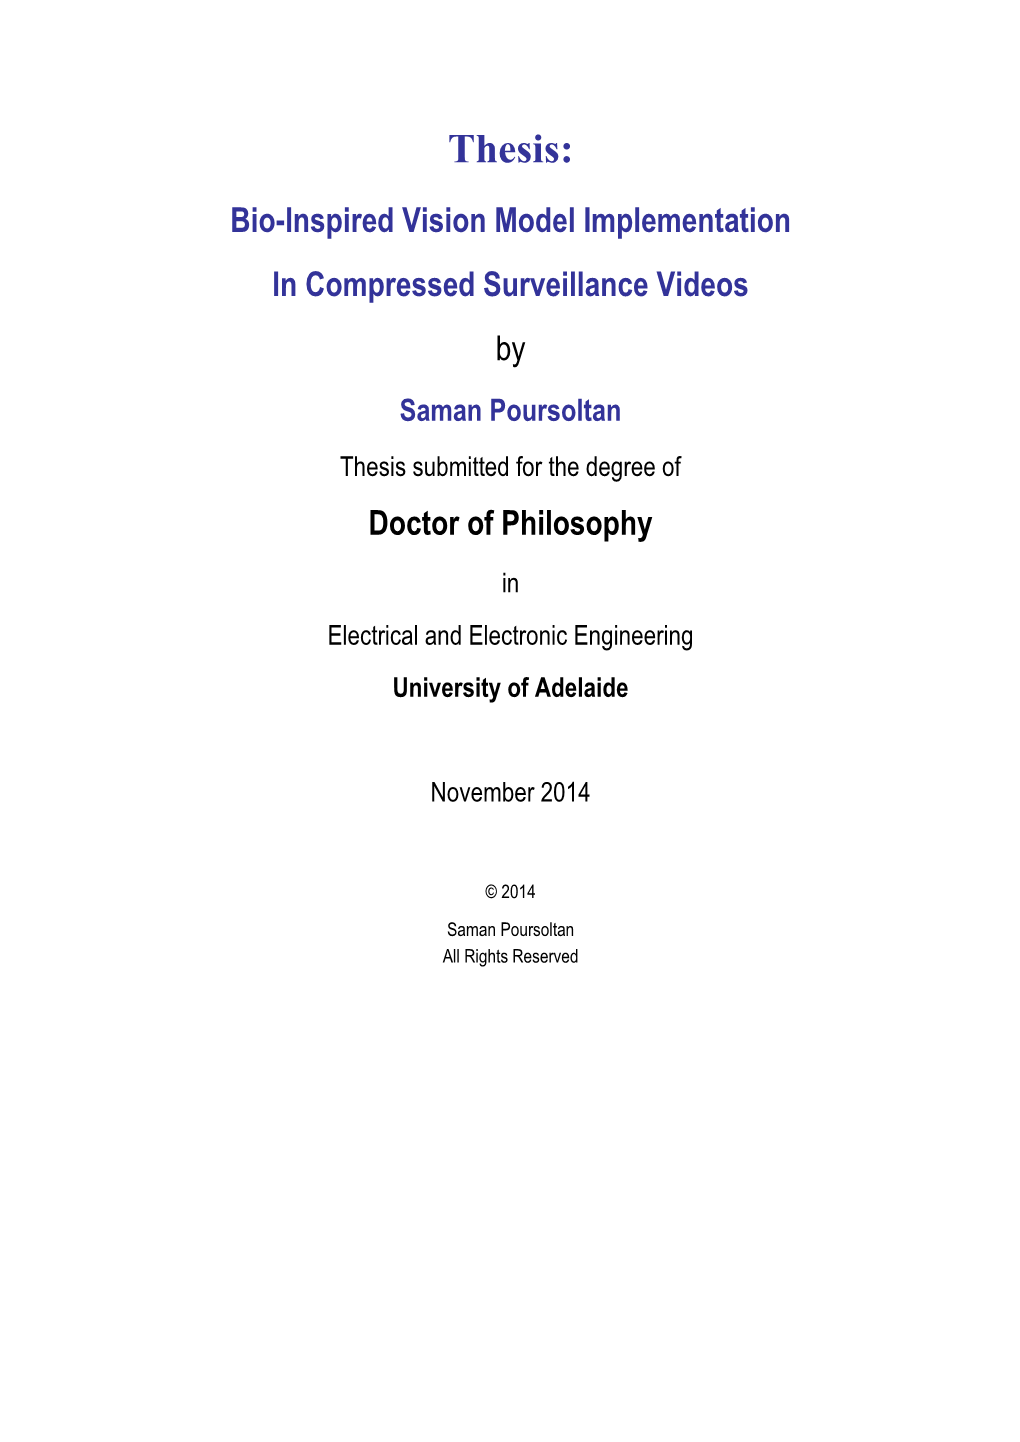 Bio-Inspired Vision Model Implementation in Compressed Surveillance Videos by Saman Poursoltan Thesis Submitted for the Degree of Doctor of Philosophy